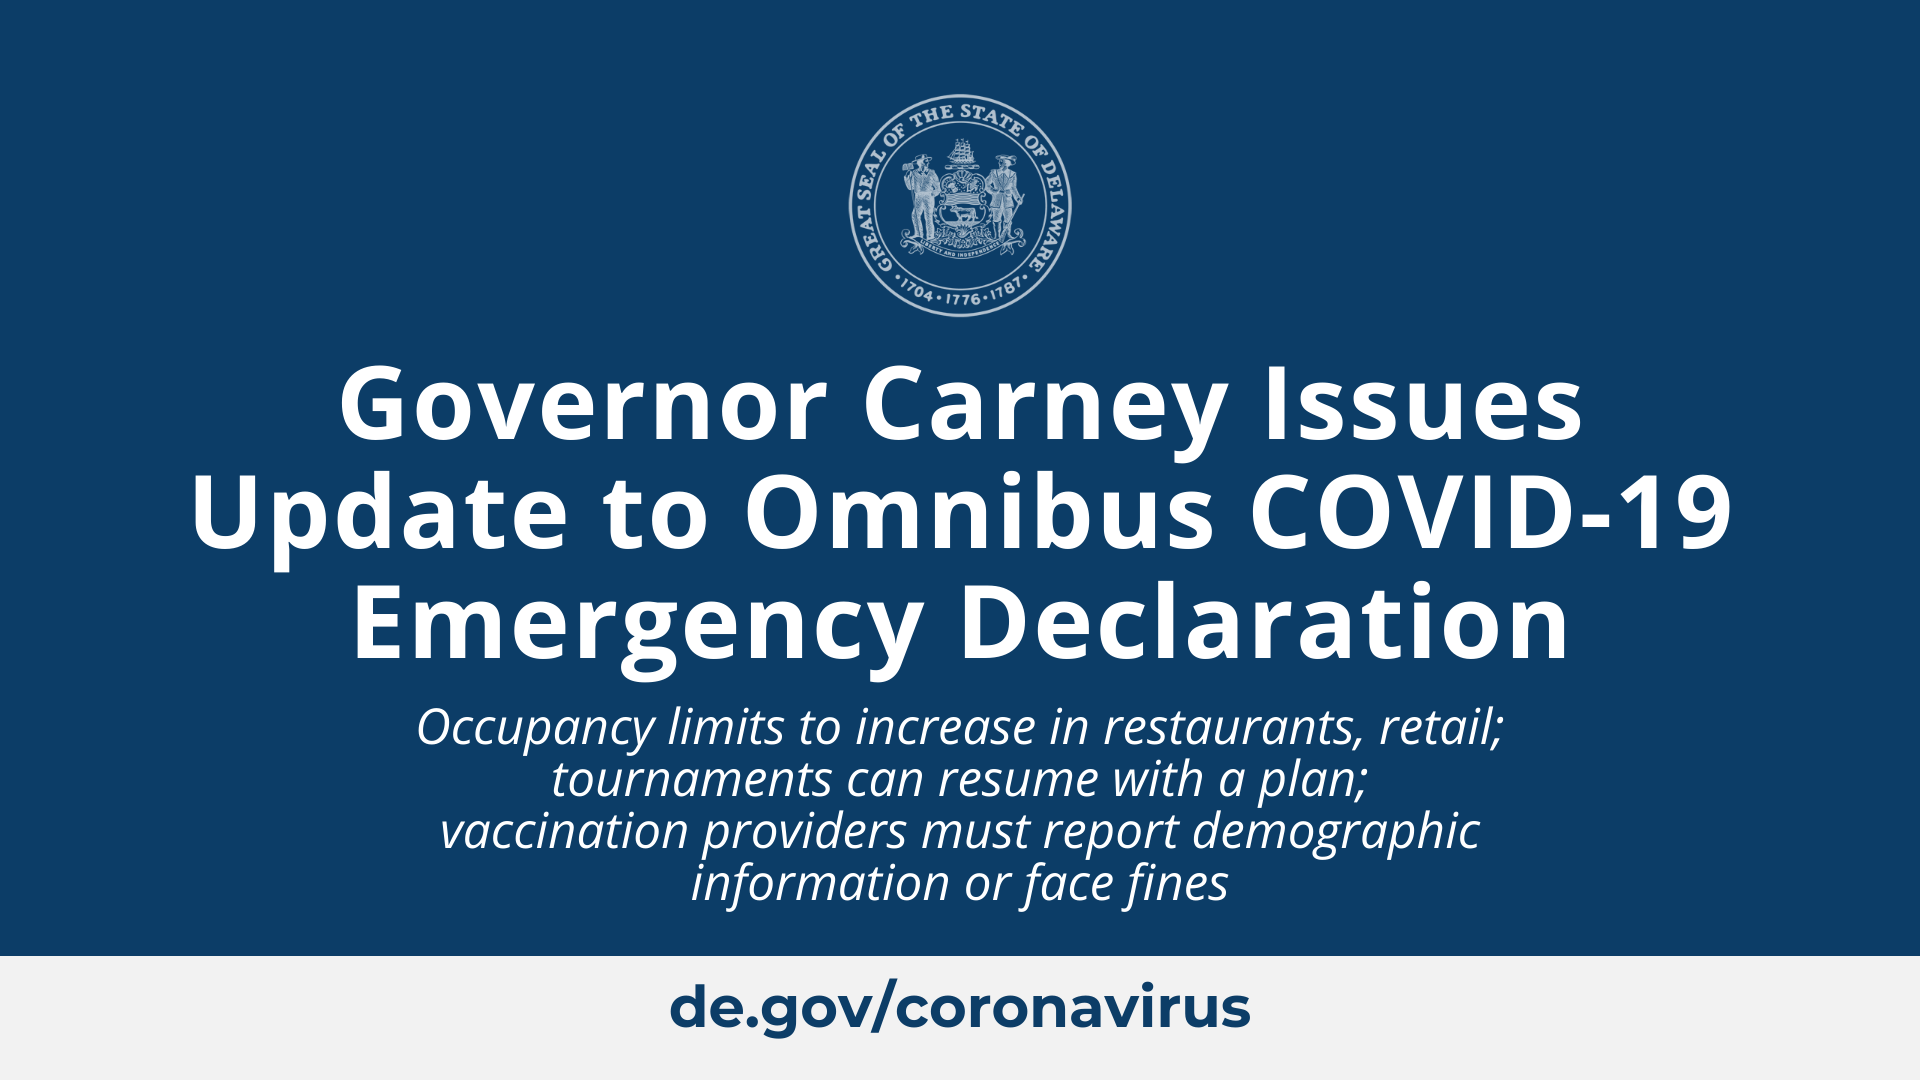 Governor Carney Issues Update to Omnibus COVID-19 Emergency Declaration